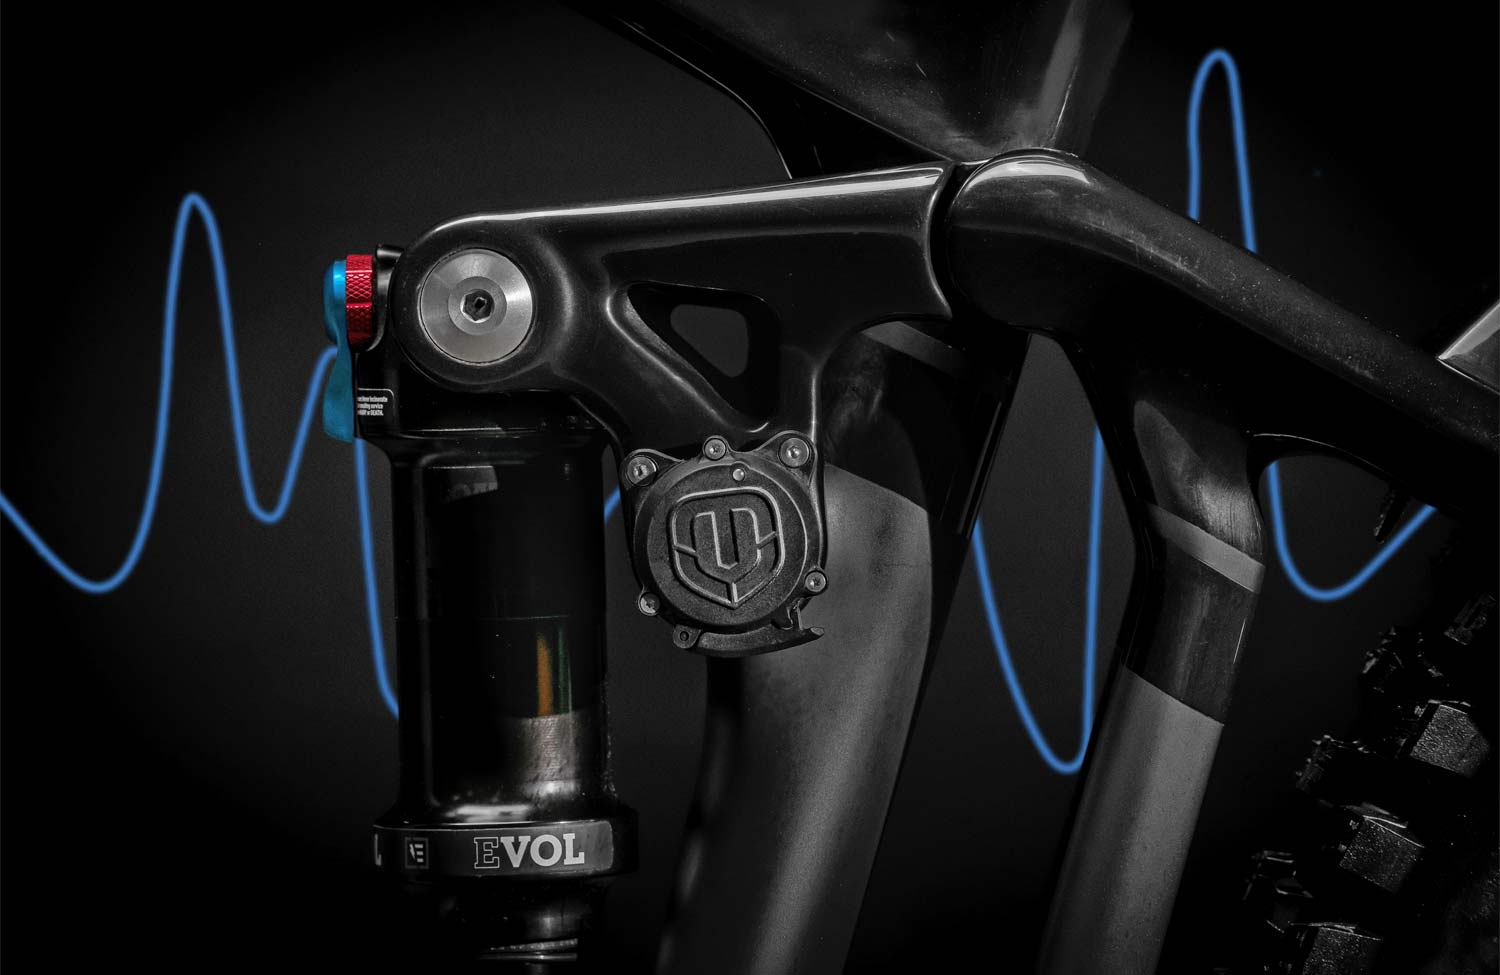 Mondraker MIND integrated telemetry tracking system suspension setup and analysis